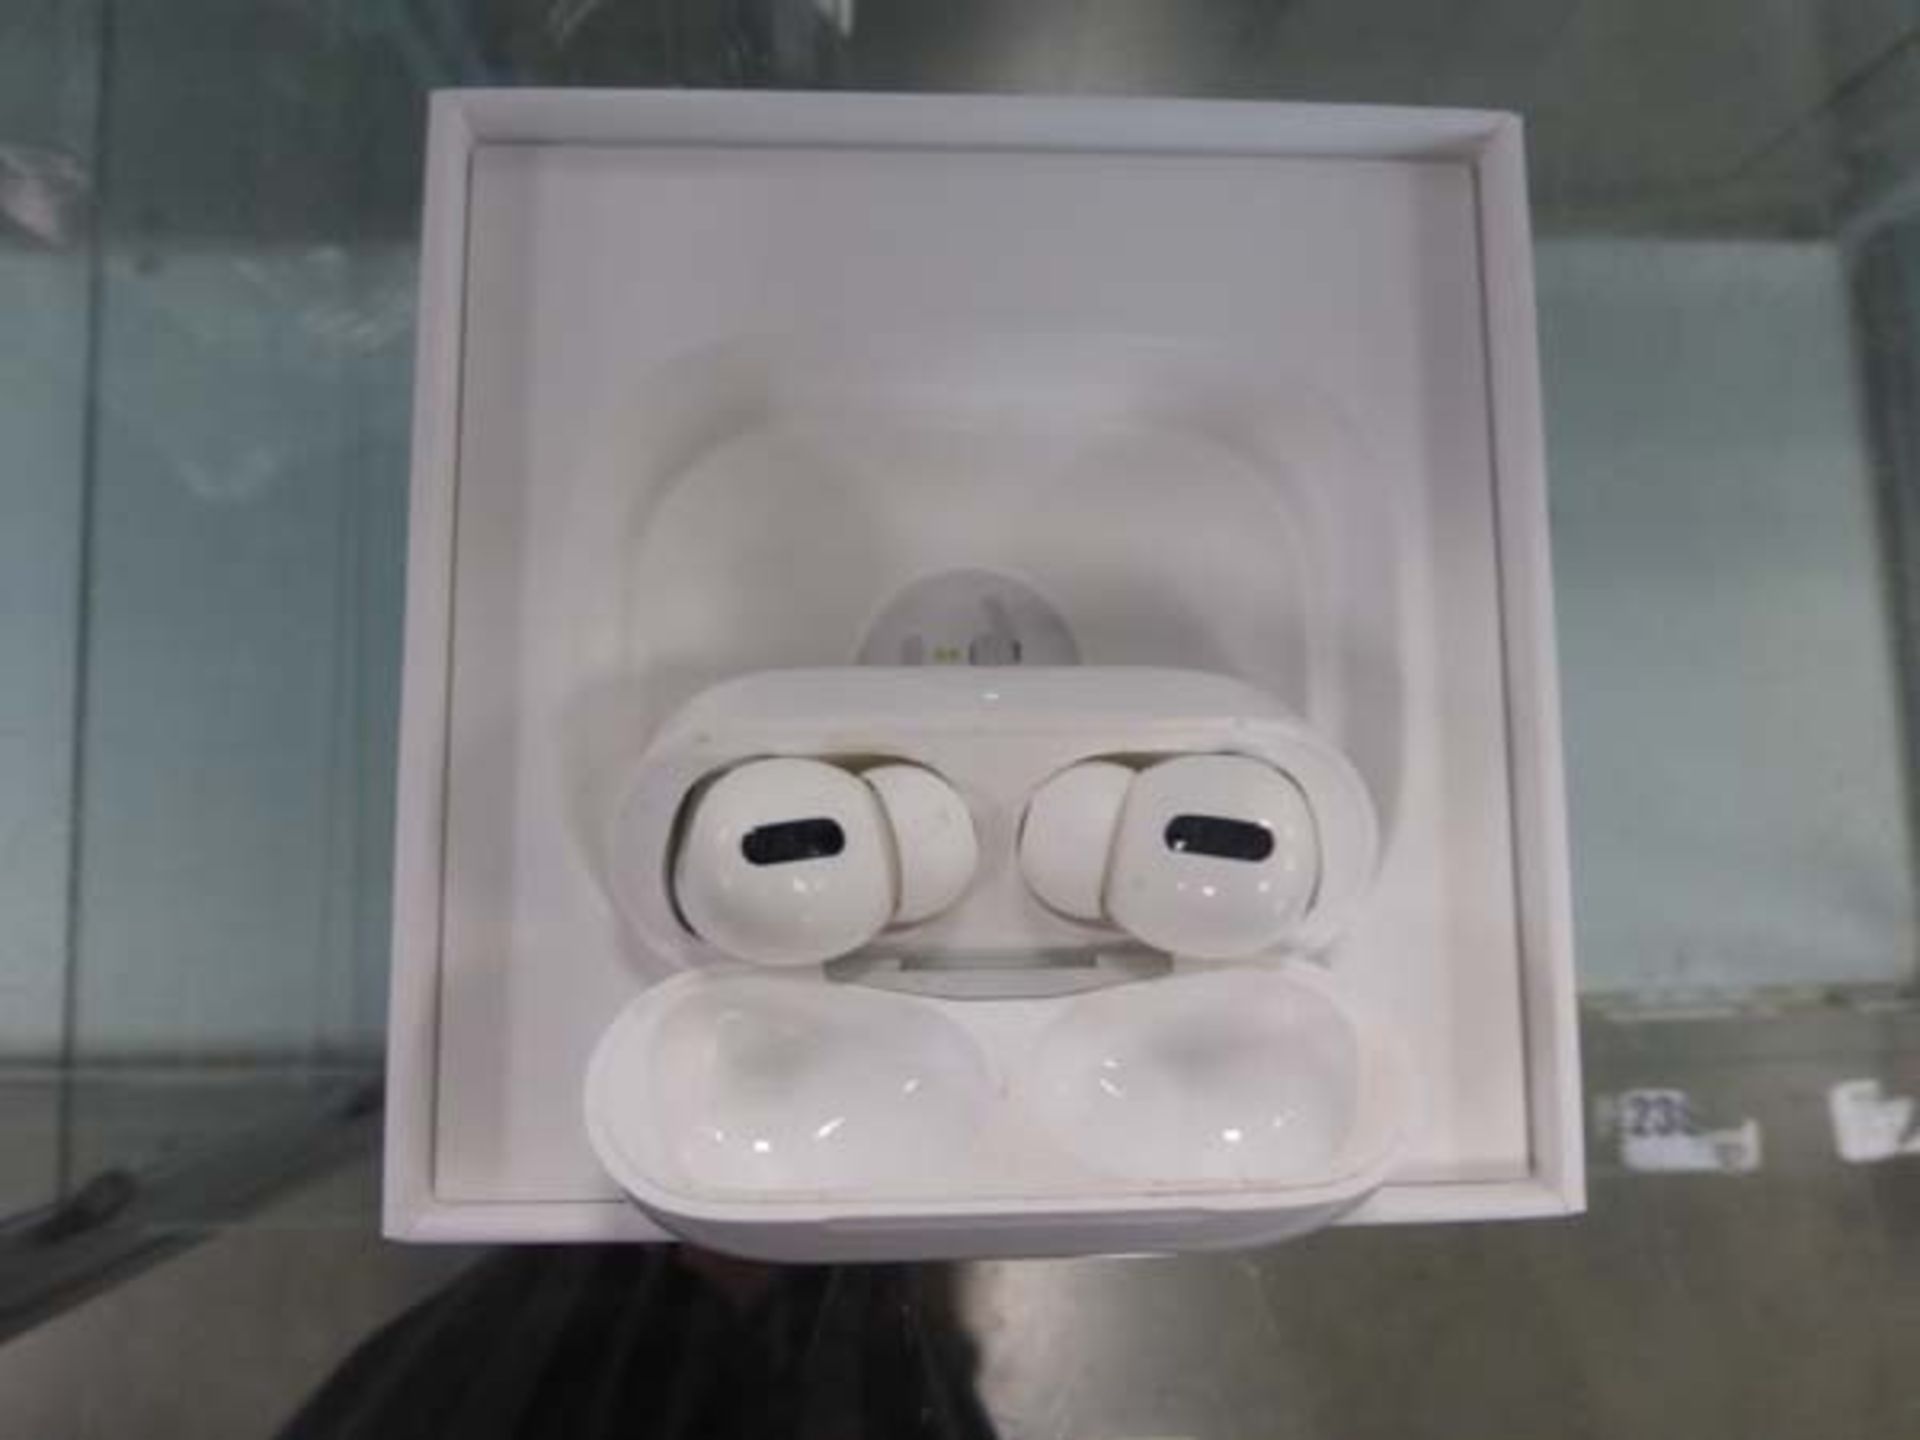 2192 Pair of Apple Airpods Pro with wireless charging case and box